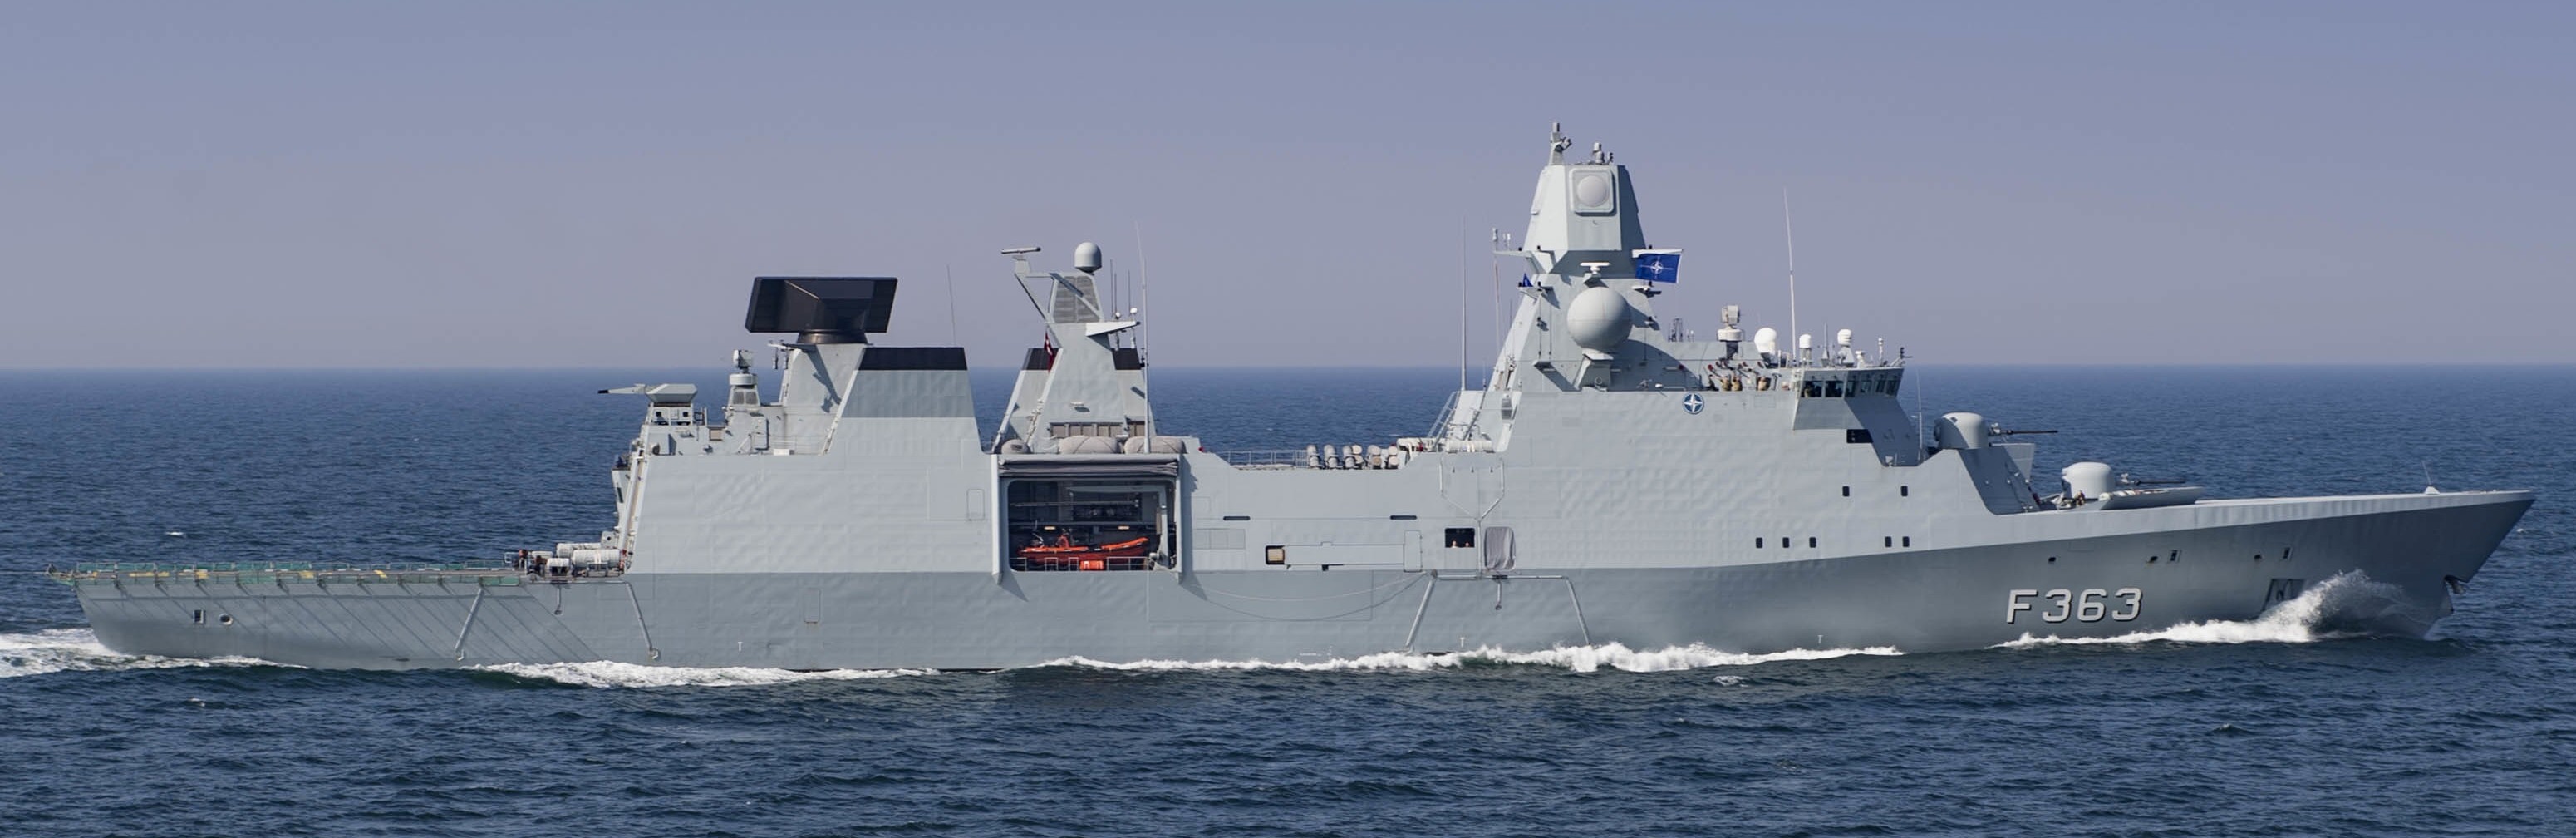 f-363 hdms niels juel iver huitfeldt class guided missile frigate ffg royal danish navy 14